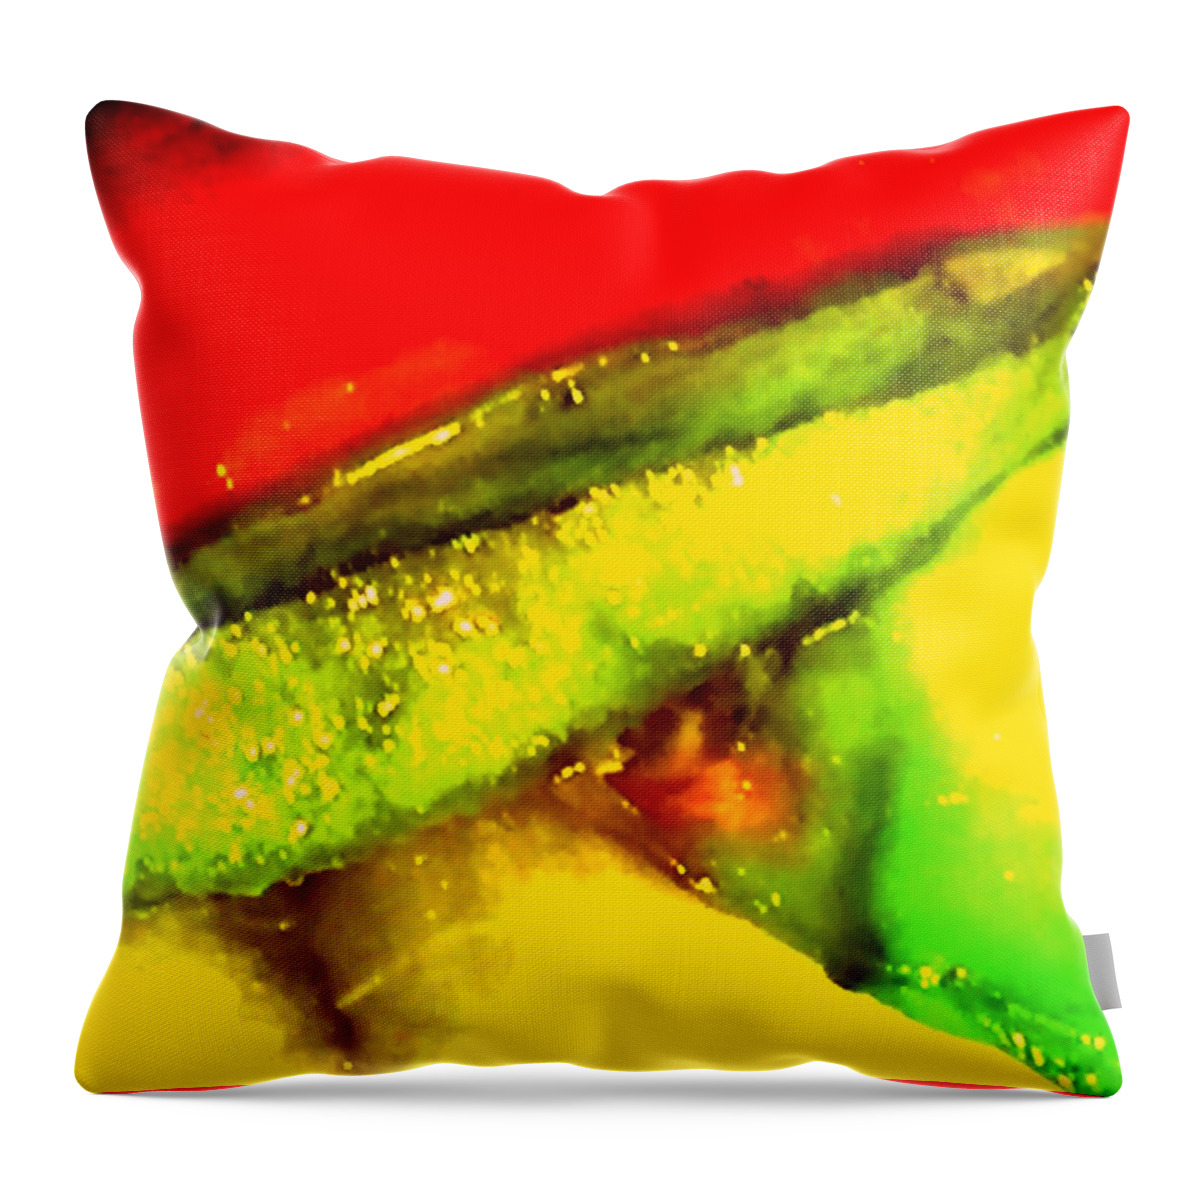 This Is A Photograh With A Sliced Apple In A Jar. Then Digitally Altered Turned Into Abstract Image That Looks More Like A Painting. Bright Colors Red Throw Pillow featuring the digital art Under The Scope by Gayle Price Thomas